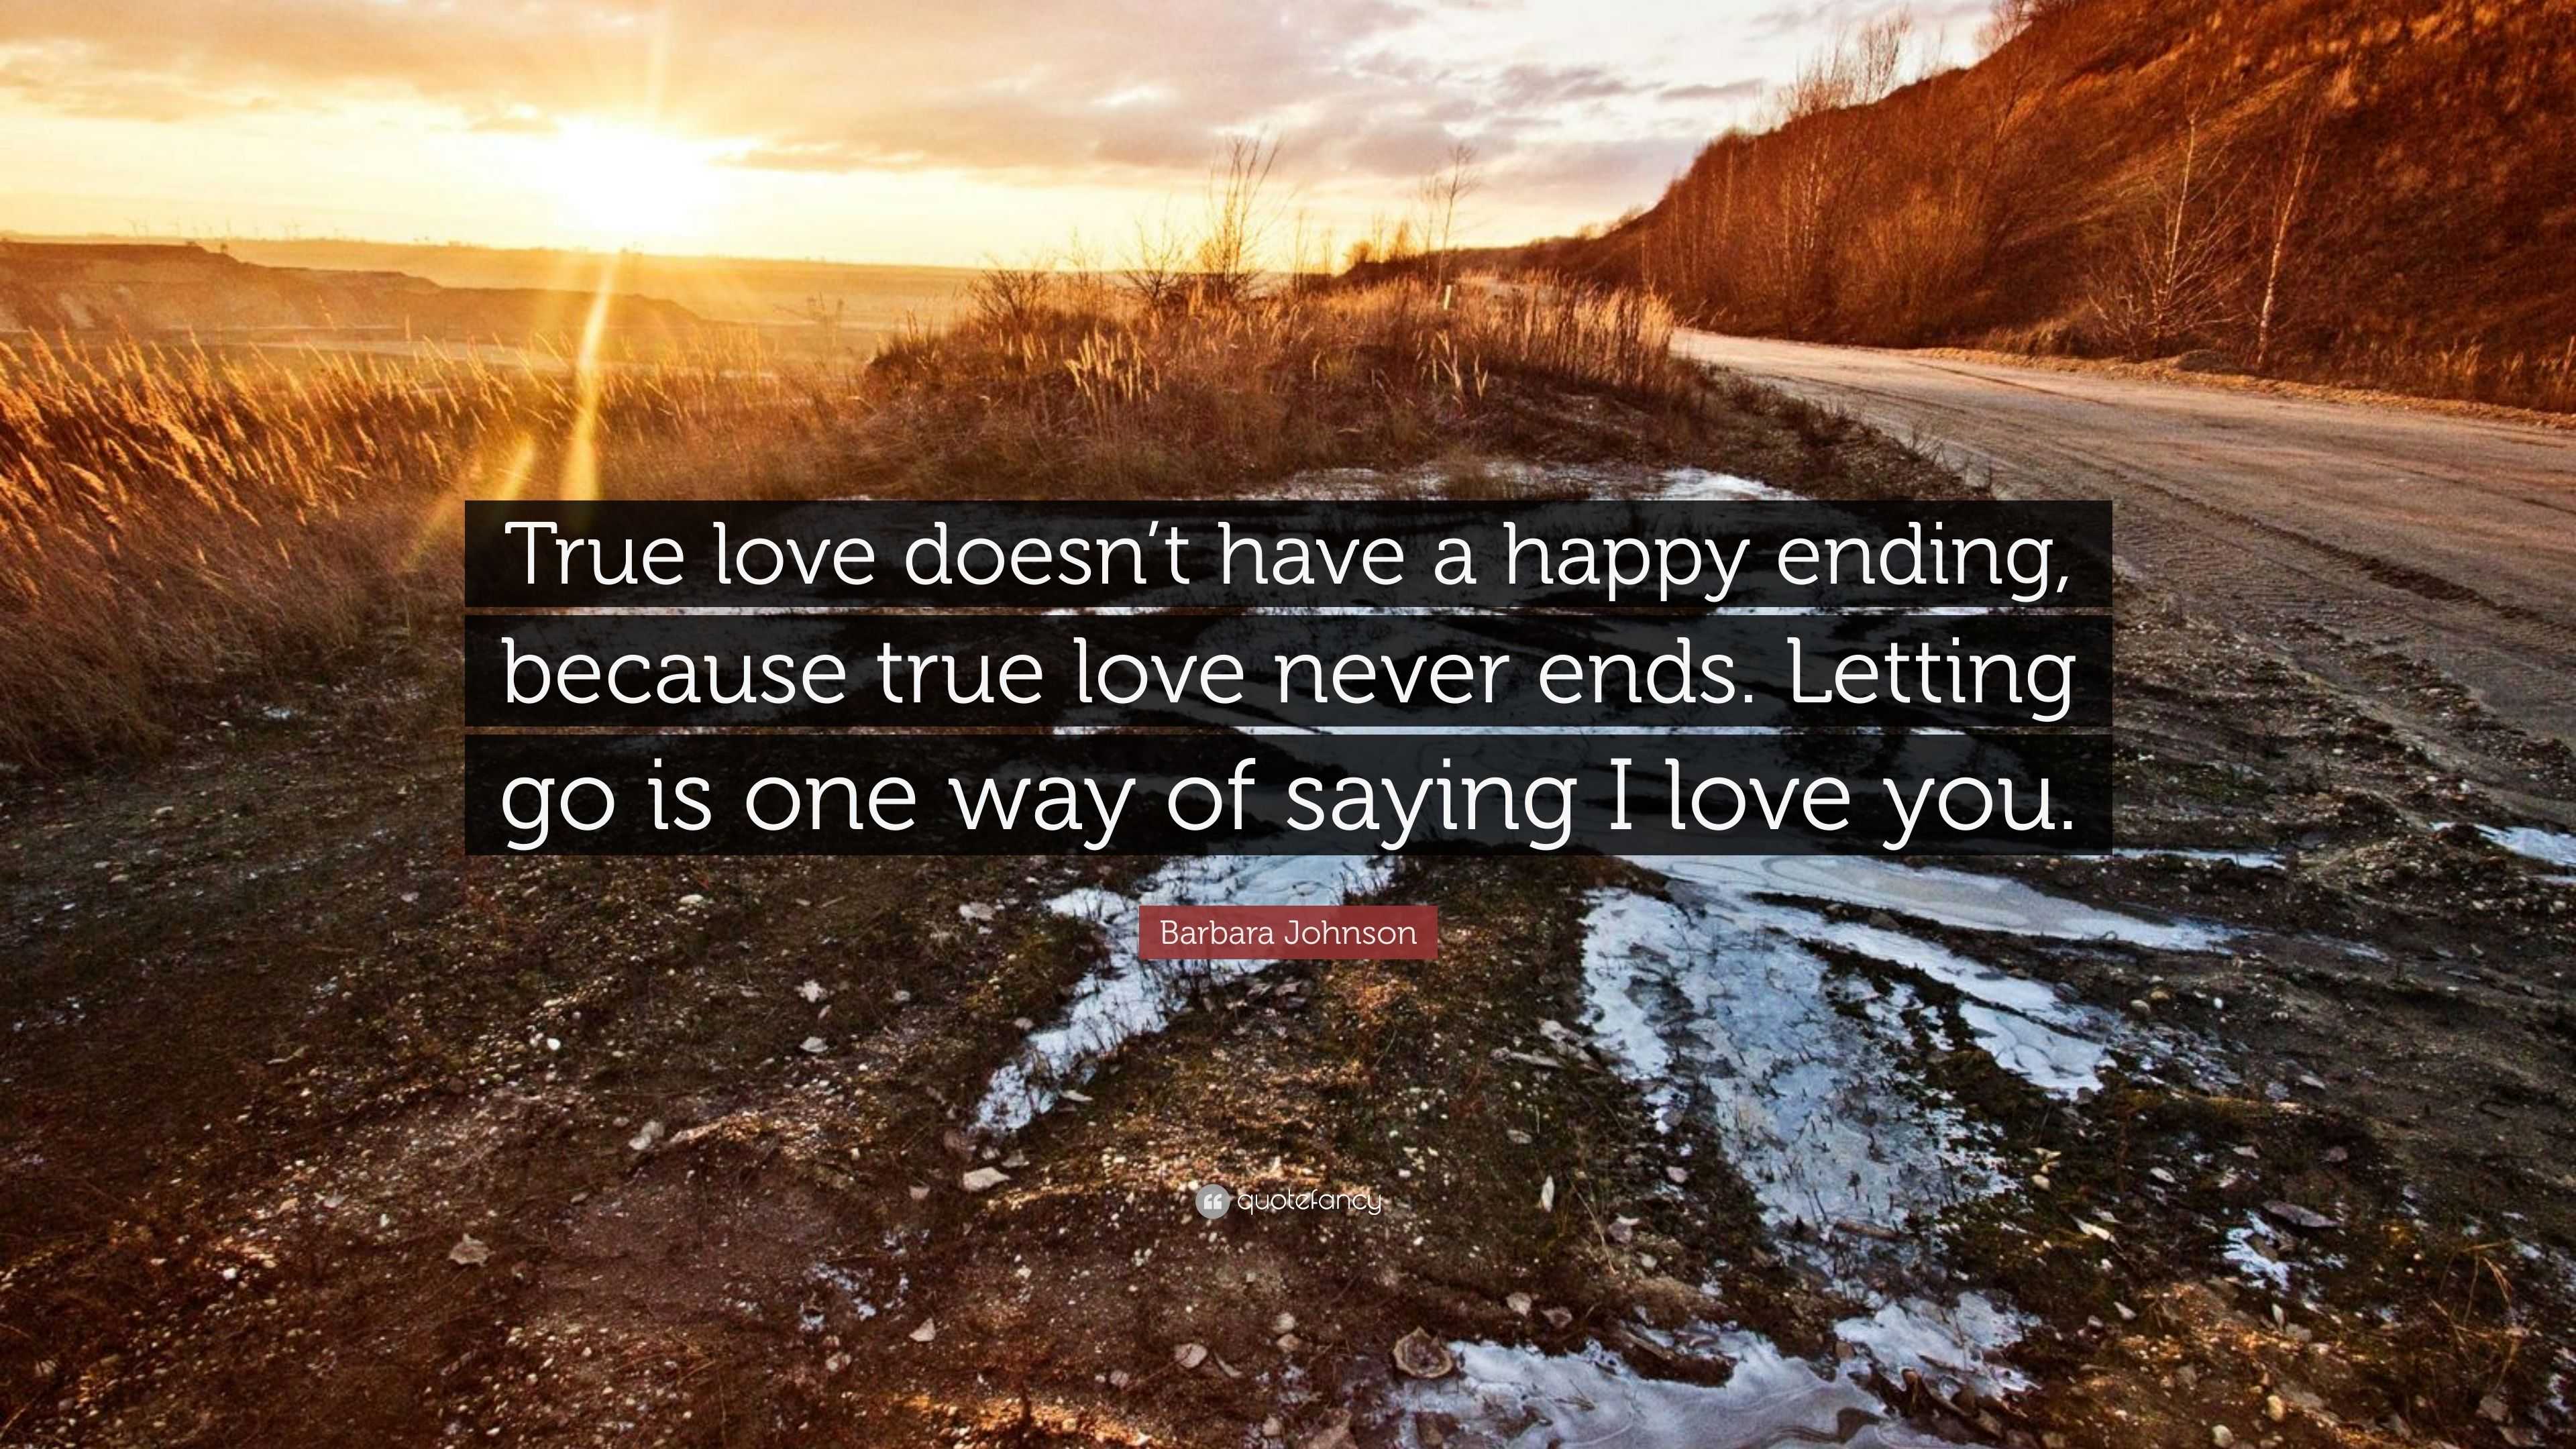 Barbara Johnson Quote: “True love doesn't have a happy ending, because true  love never ends.